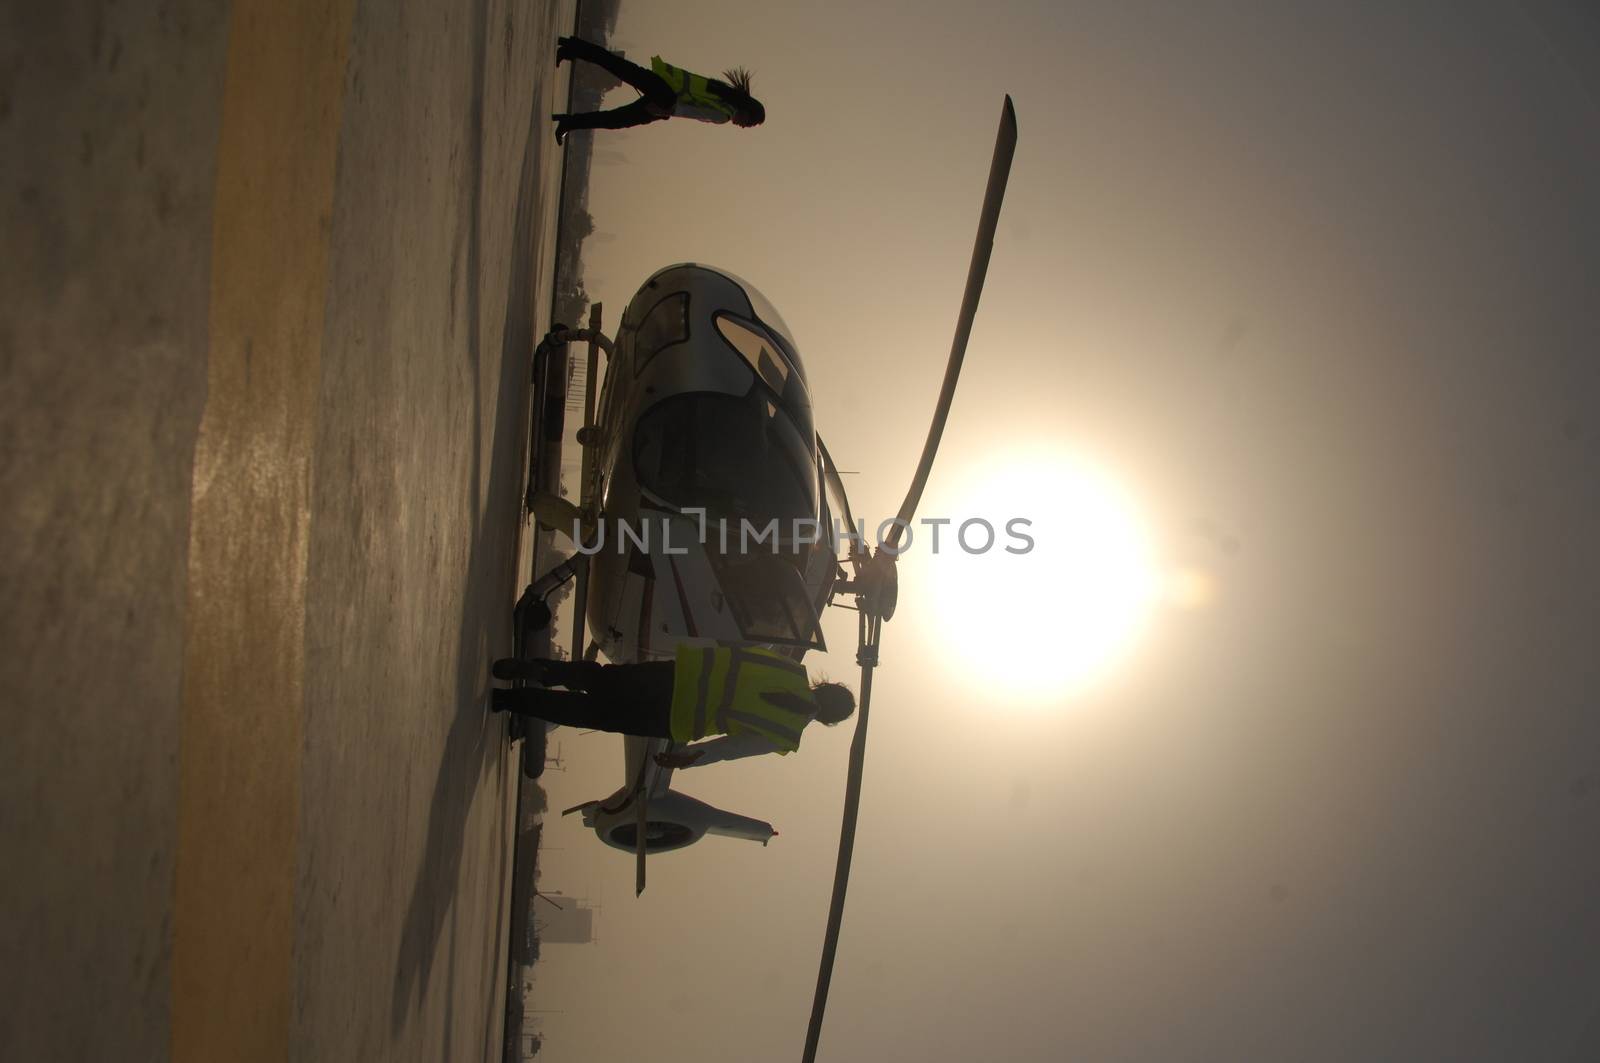 Private Helicopter by rajastills